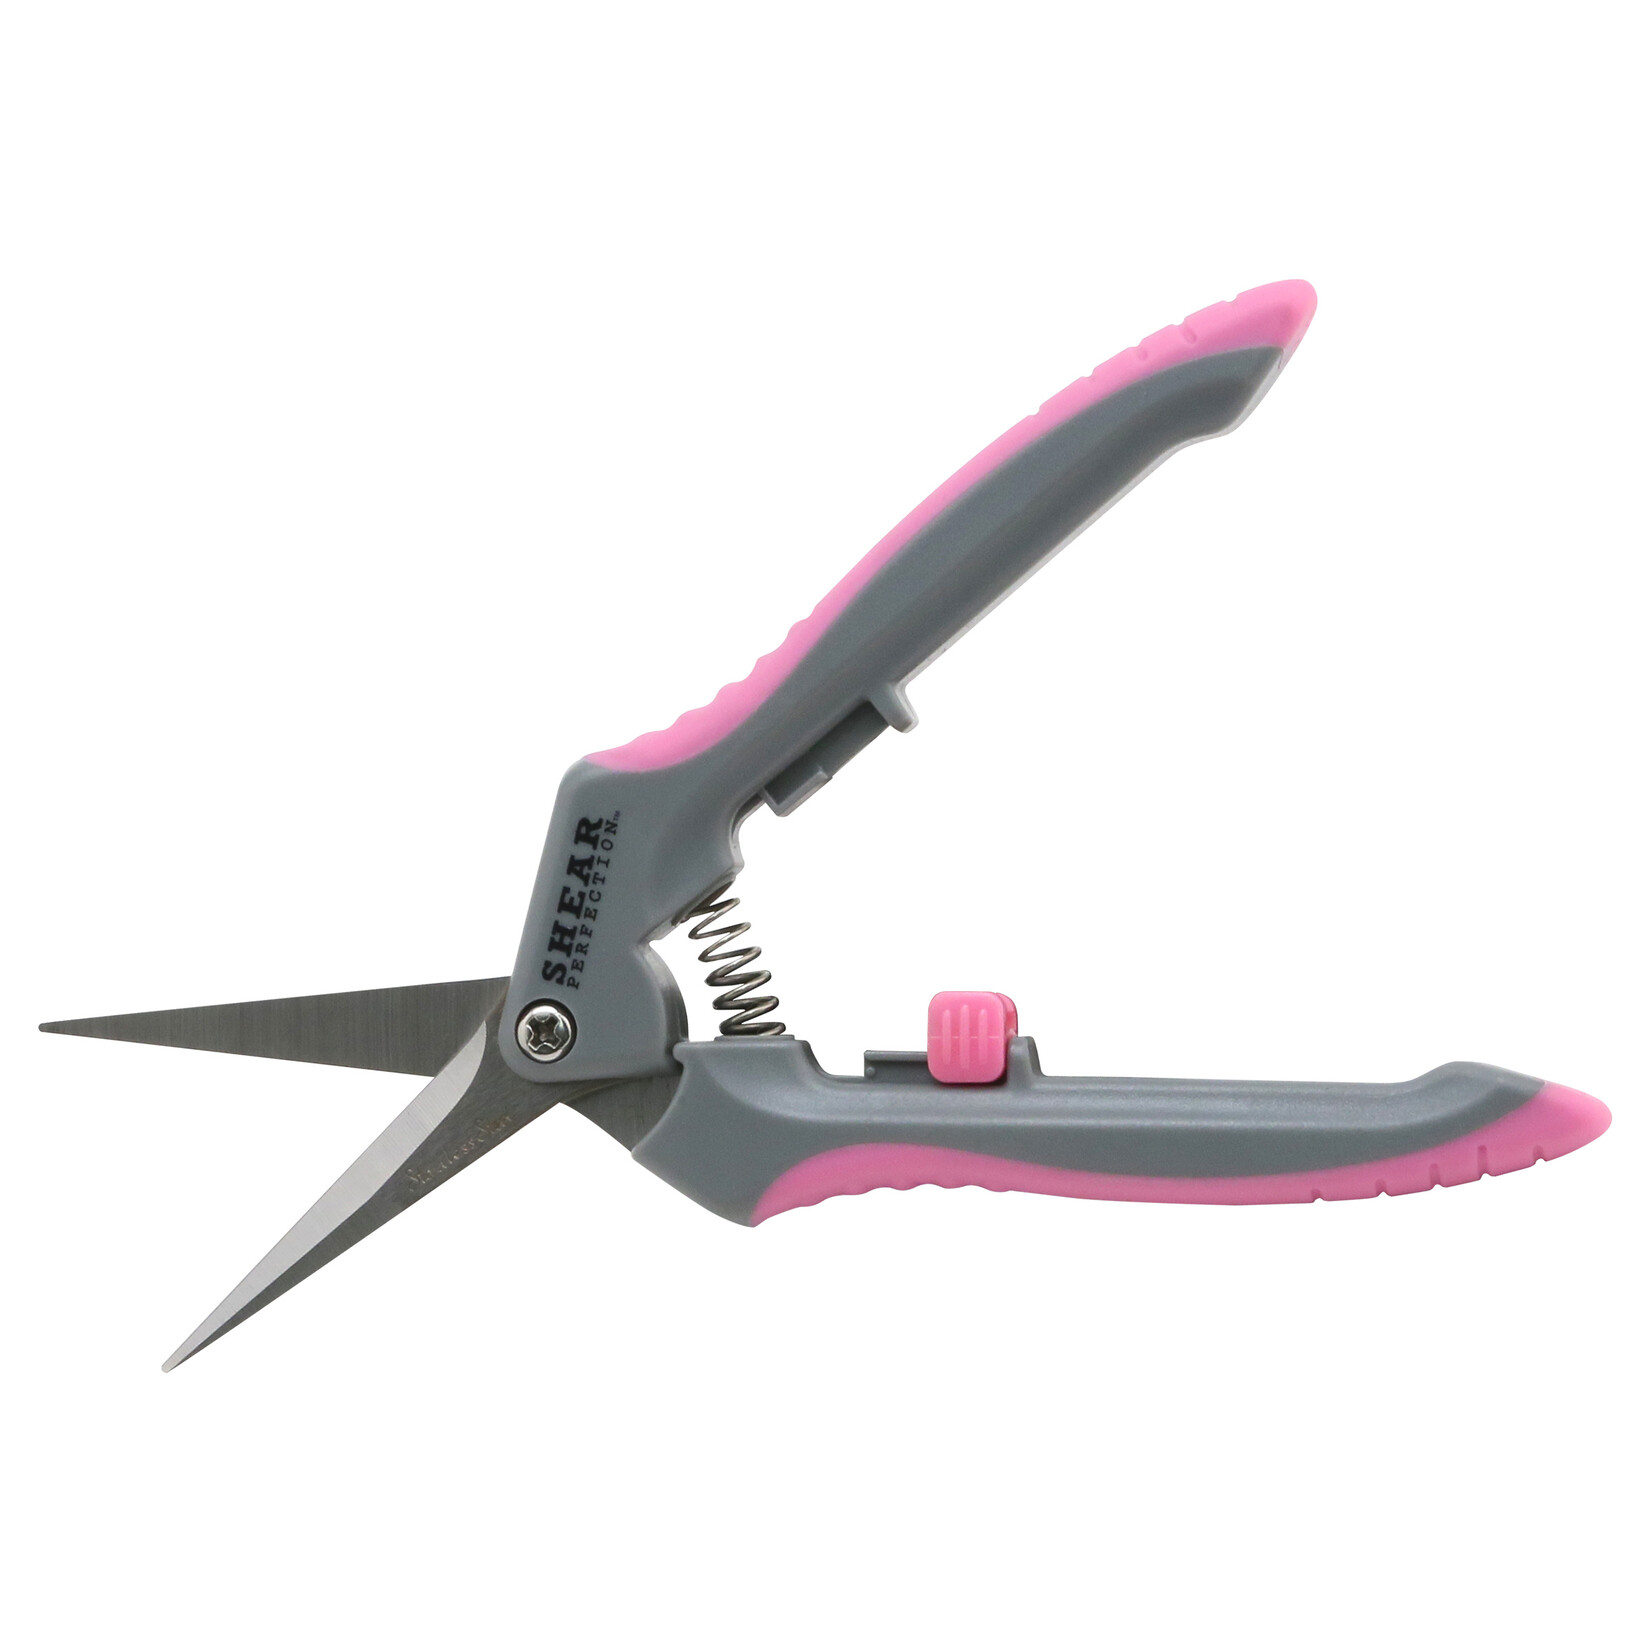 Shear Perfection Shear Perfection Pink Platinum Stainless Trim Shears -2 Straight Blades